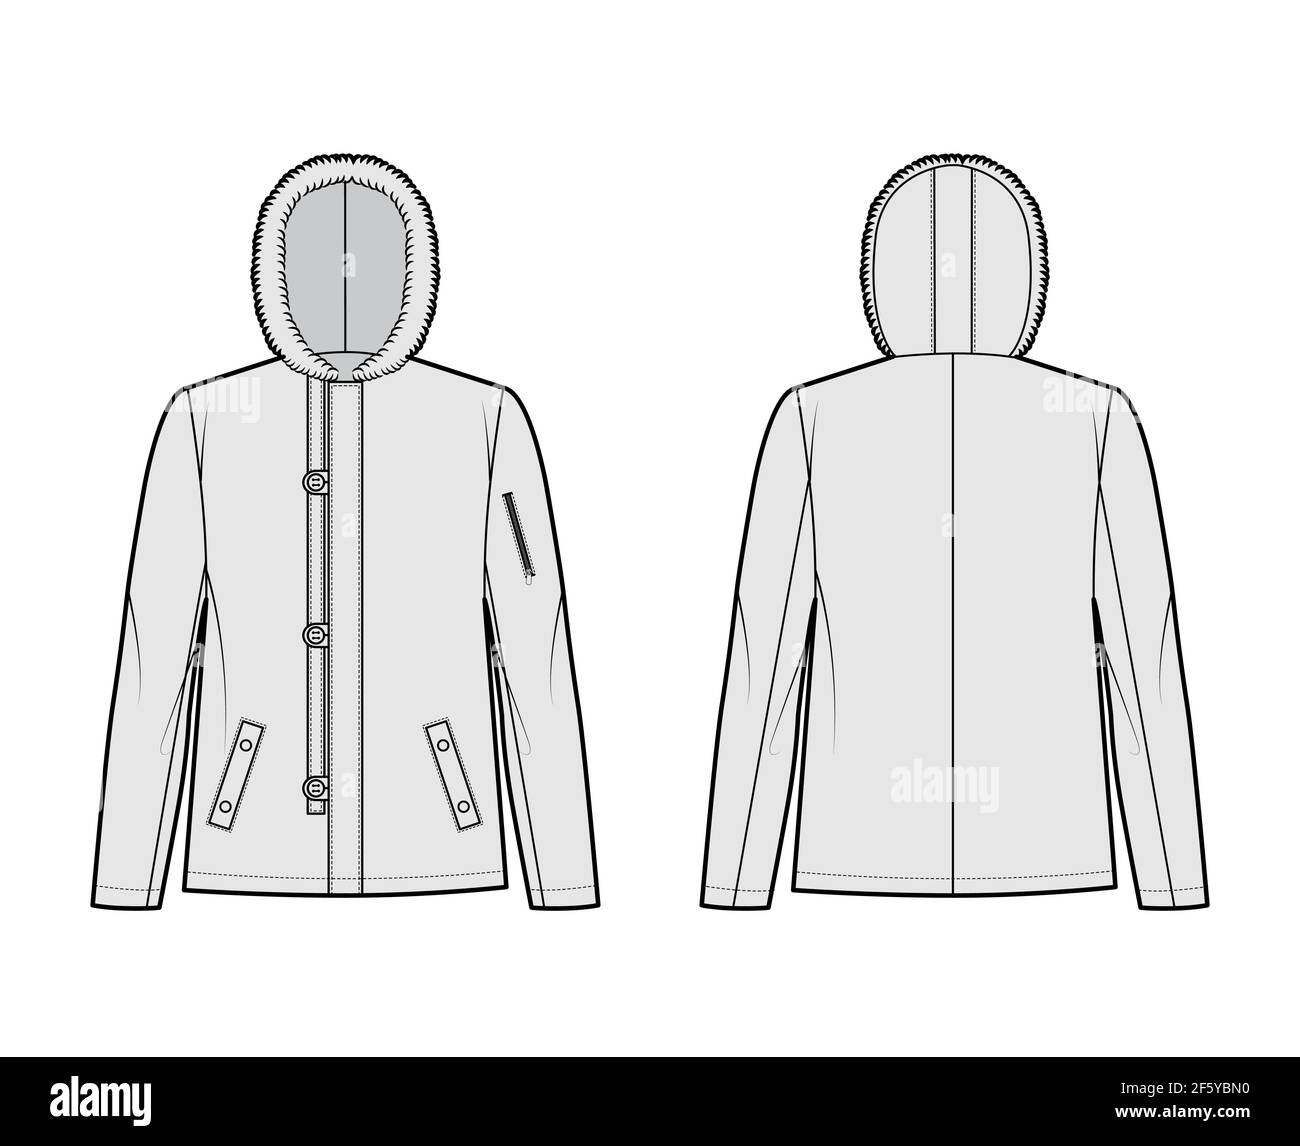 N-2B flight jacket technical fashion illustration with oversized, fur hood, long sleeves, pockets, button loop opening. Flat coat template front, back grey color style. Women men unisex top CAD mockup Stock Vector